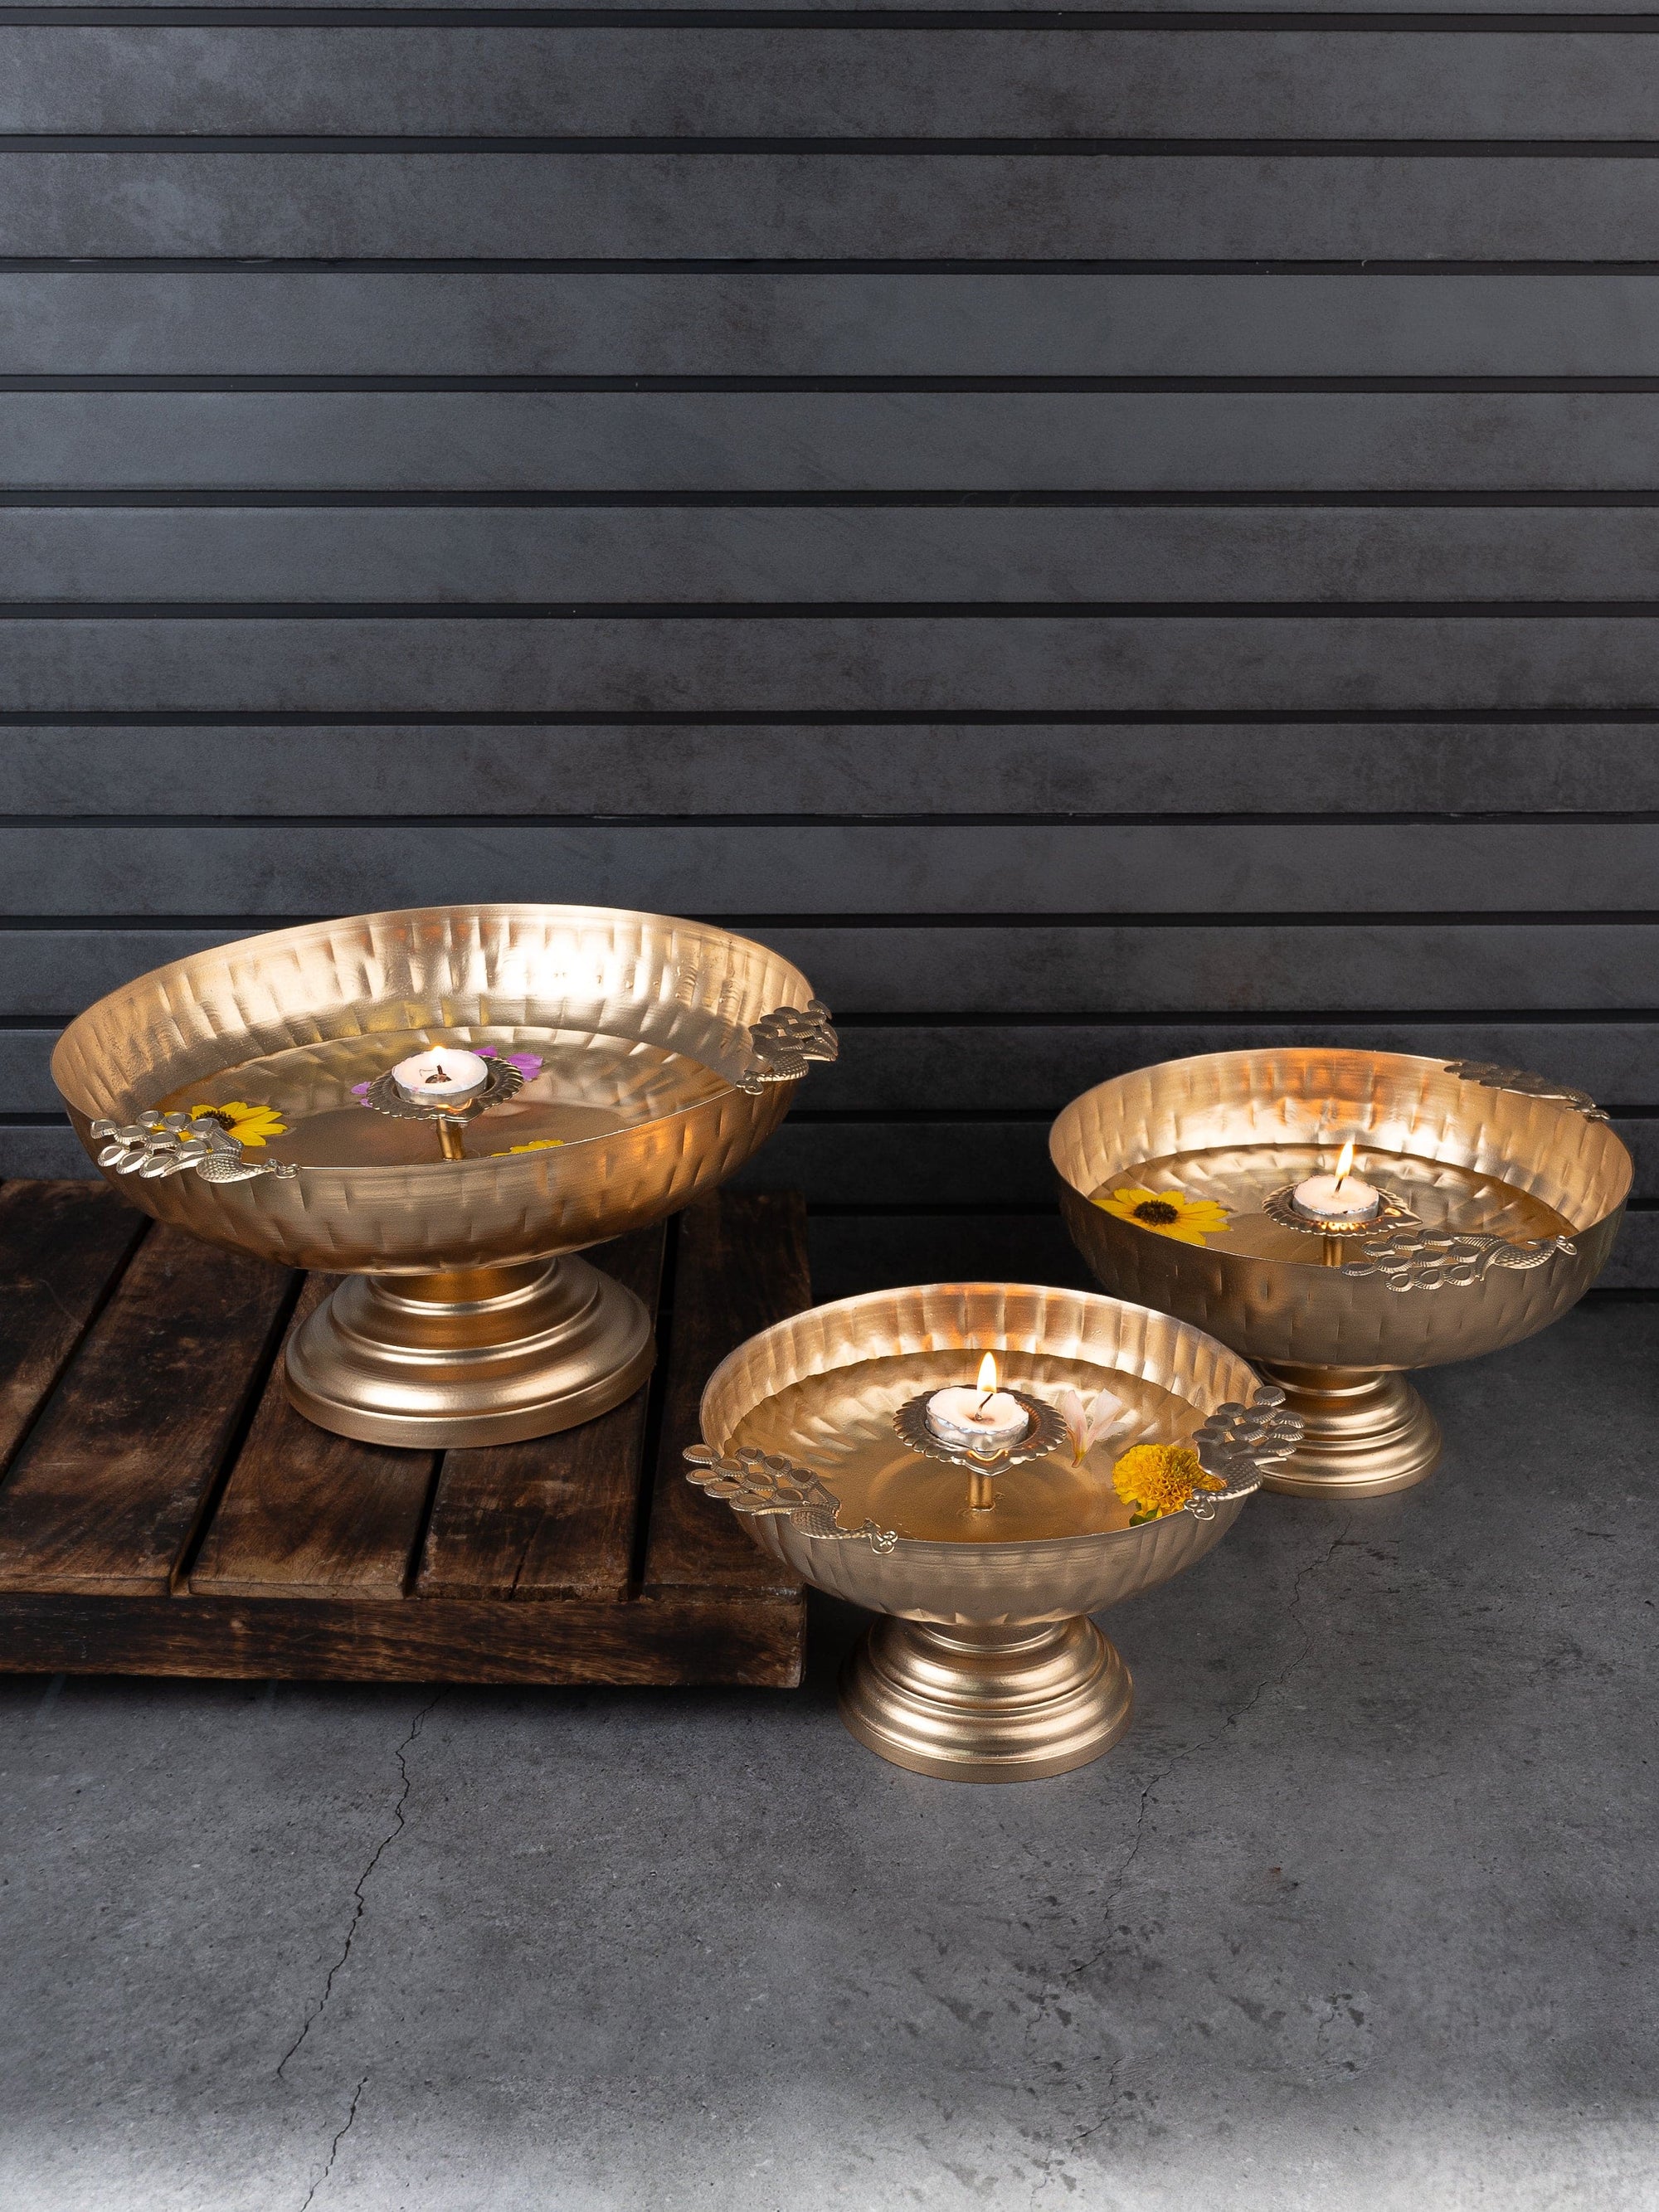 Hammered Metal Set of 3 Urli for Home Decor and Puja Rituals